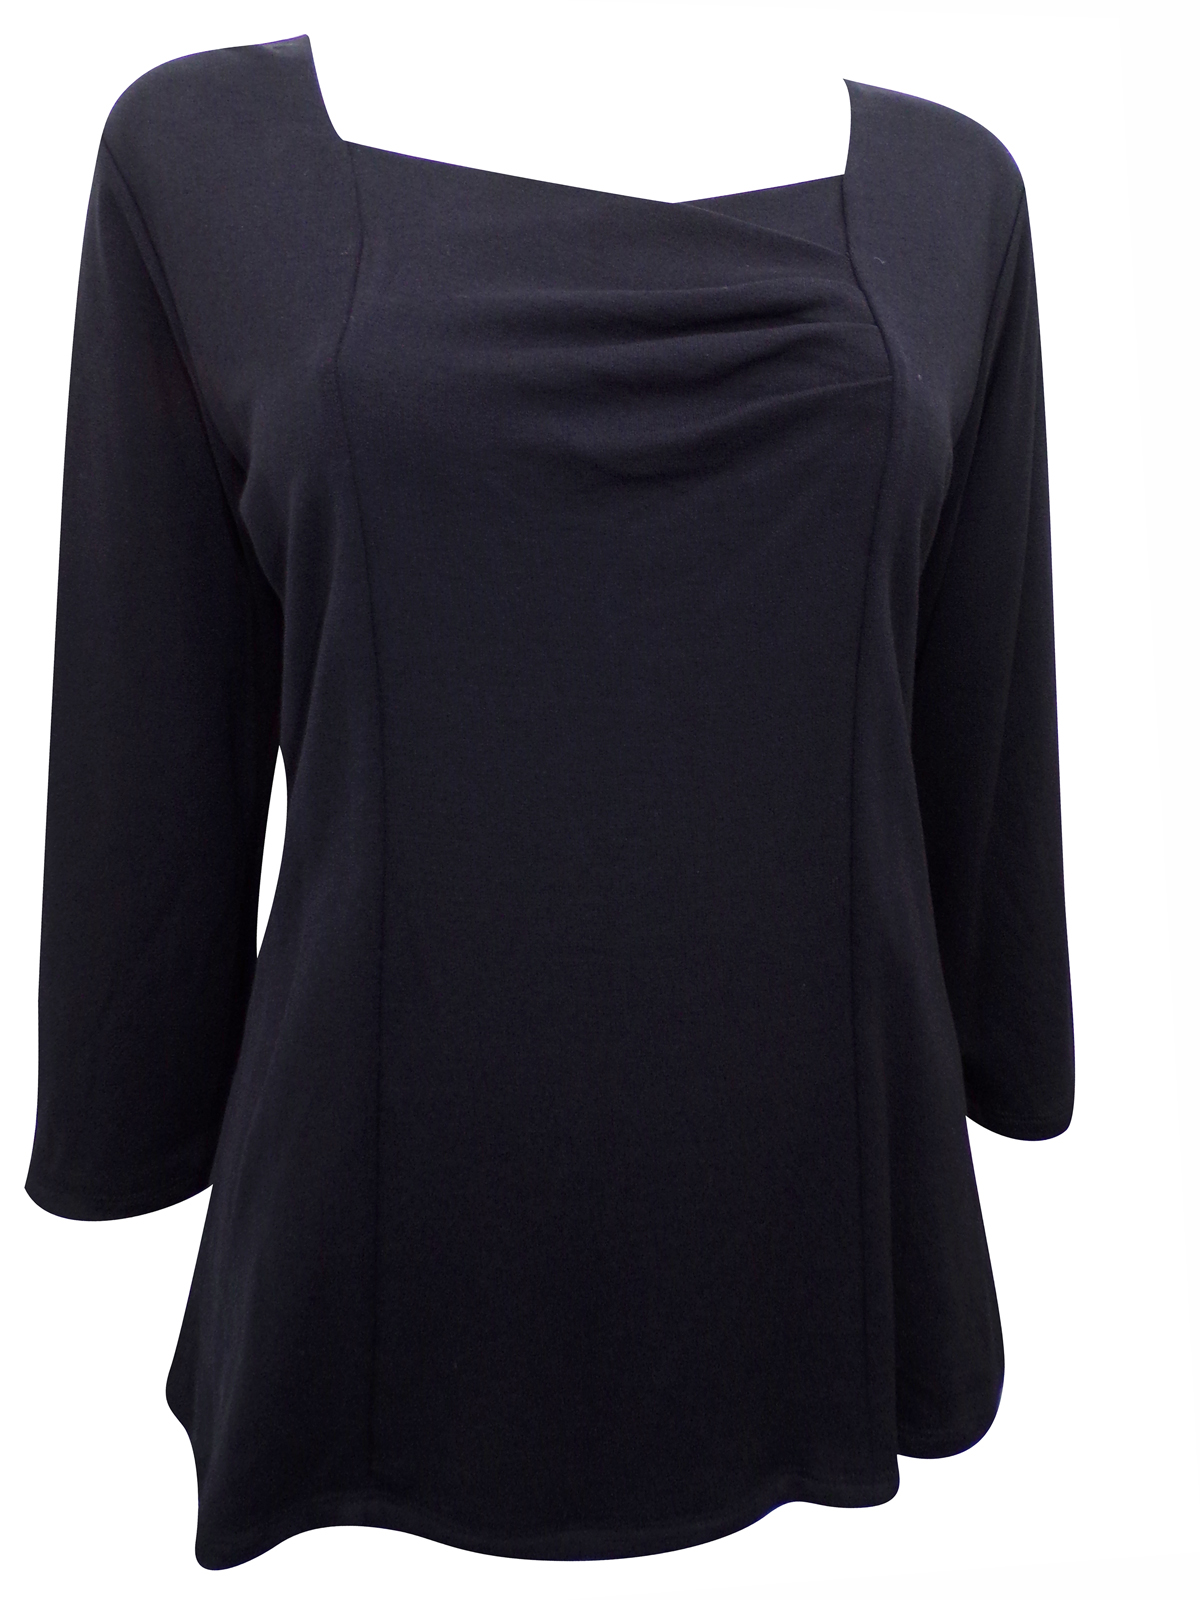 //text.. - - BLACK Ruched Front 3/4 Sleeve Top - Size 12 to 18